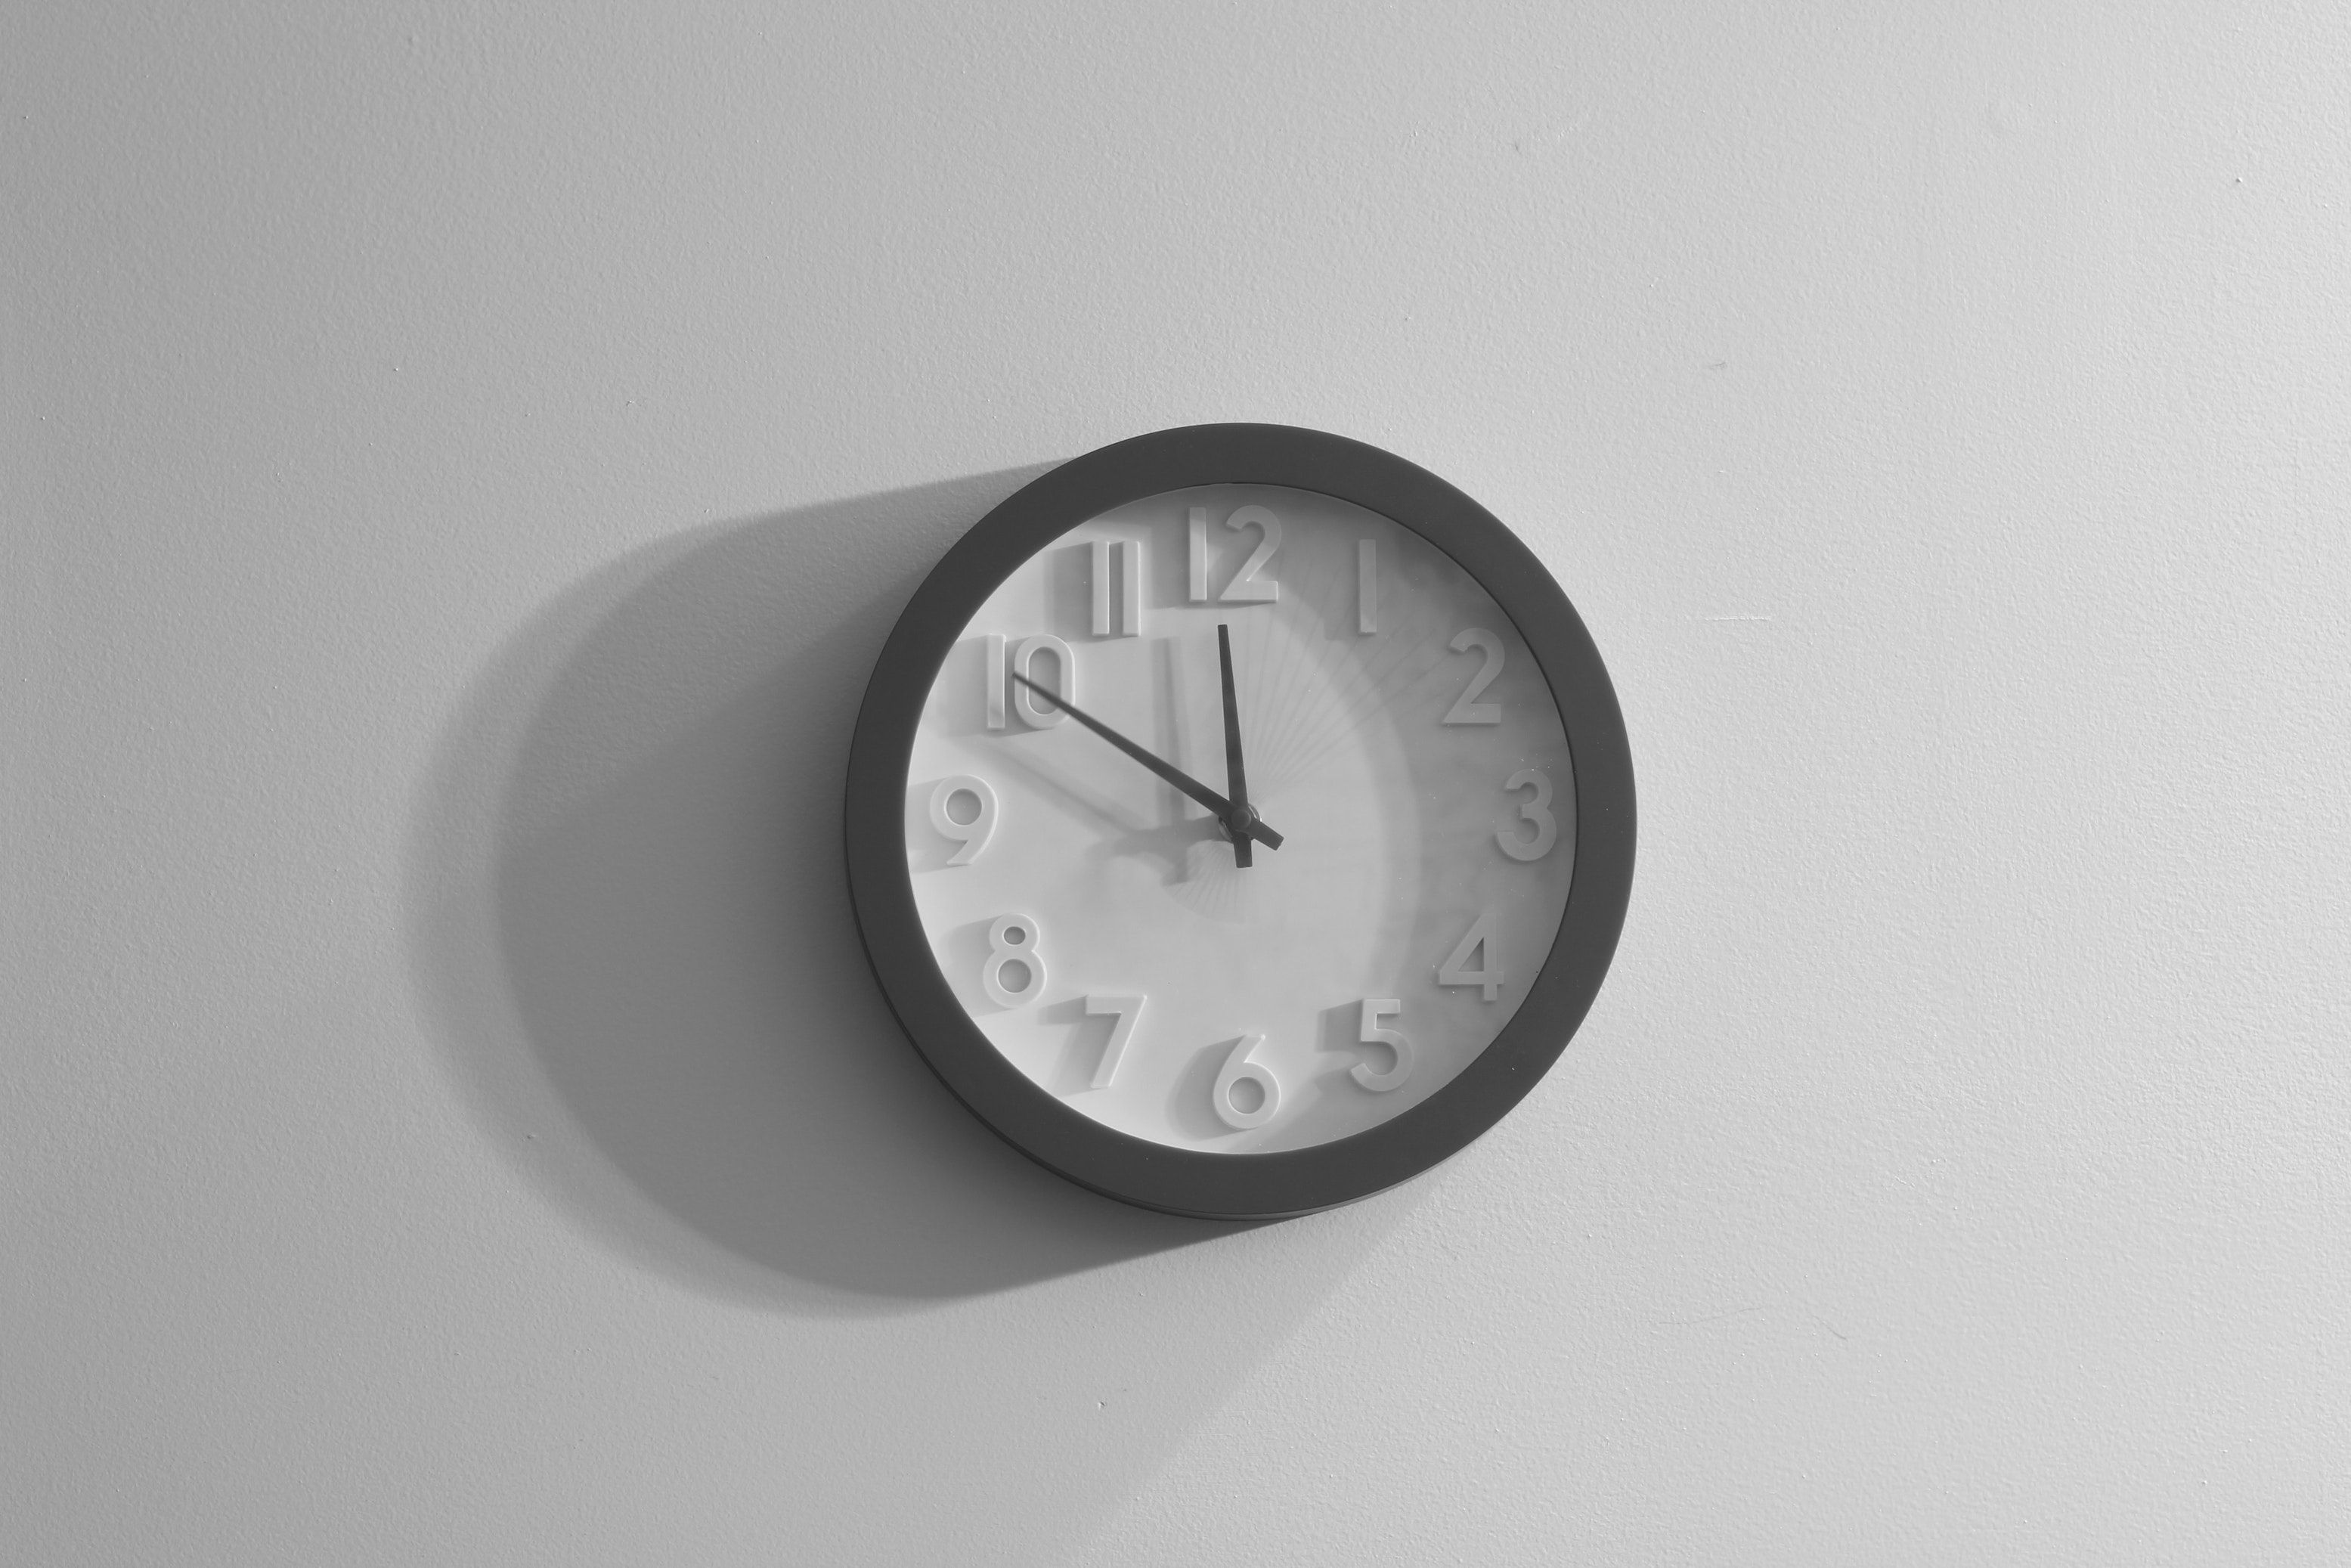 White-faced wall clock with a gray border hangs on a white wall